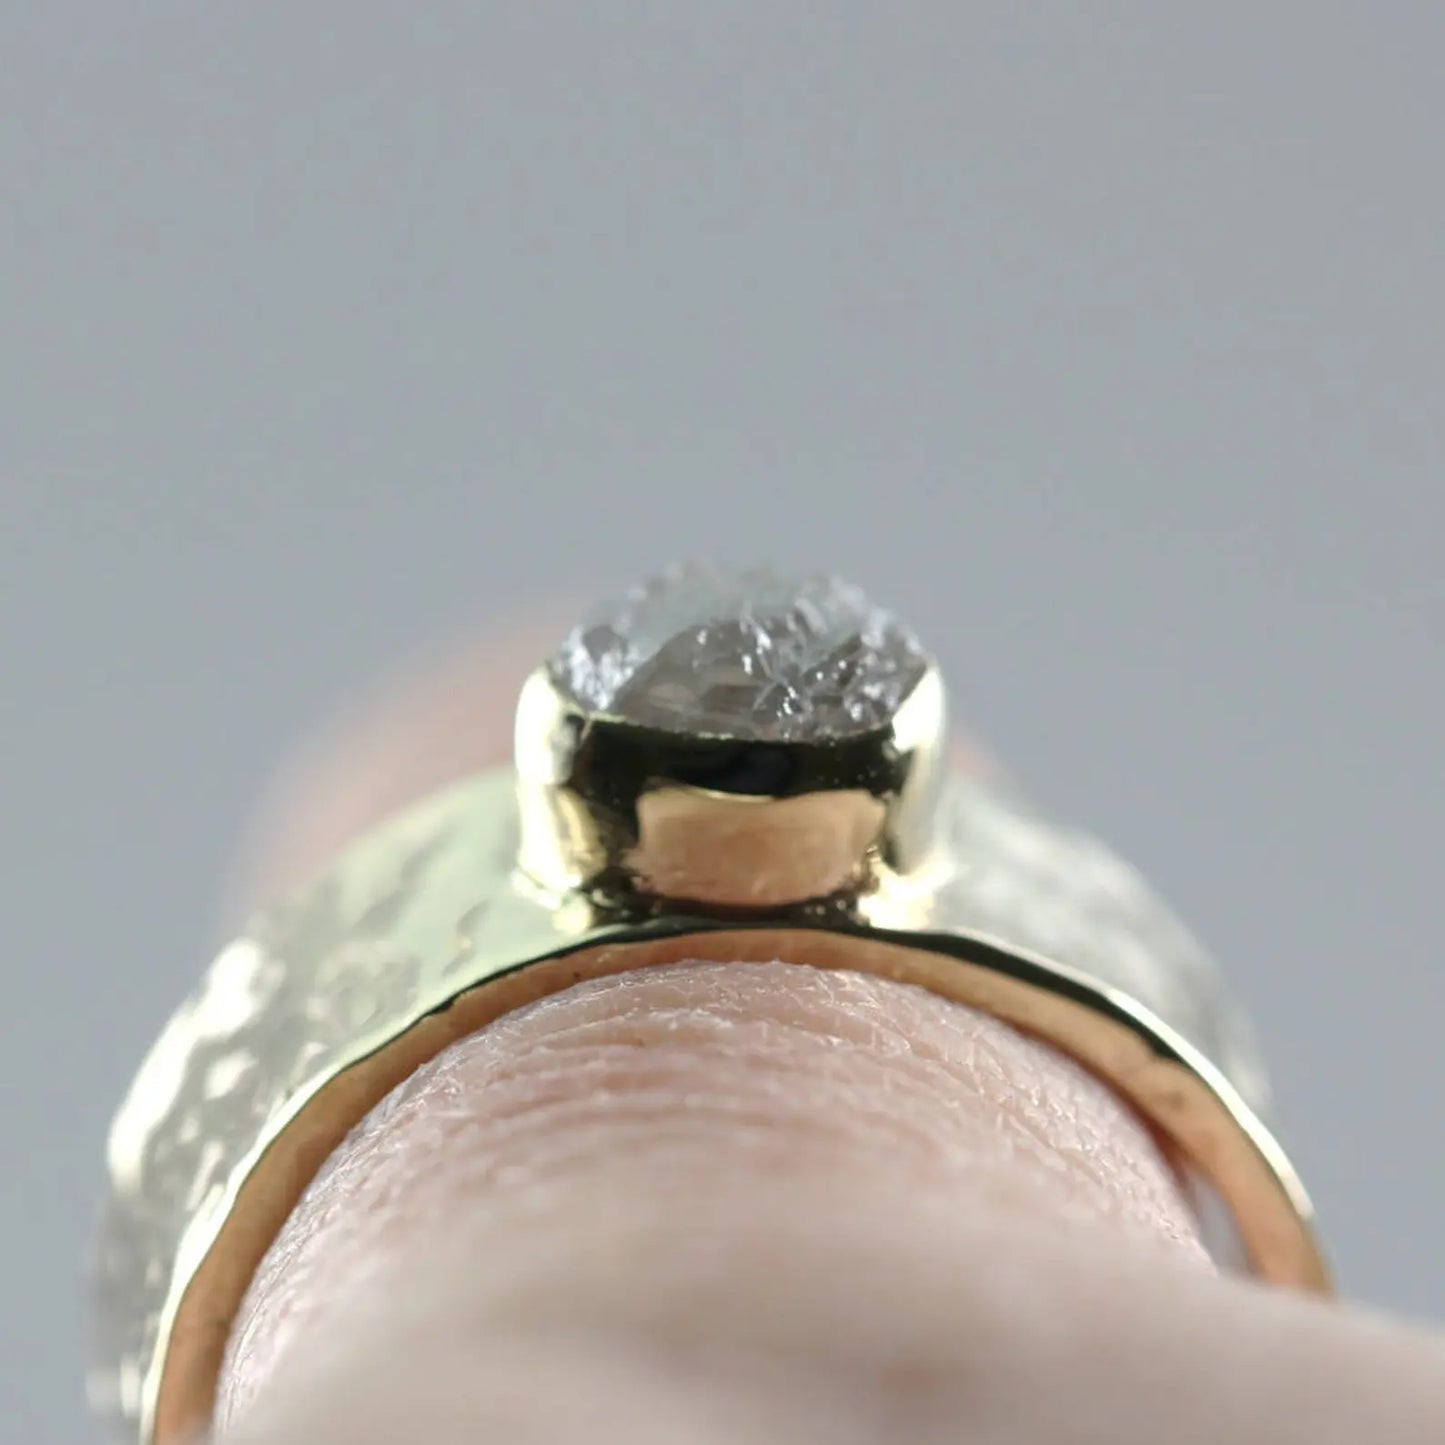 Raw Diamond Ring - 14K Yellow Gold - Rustic Hammered Style Ring